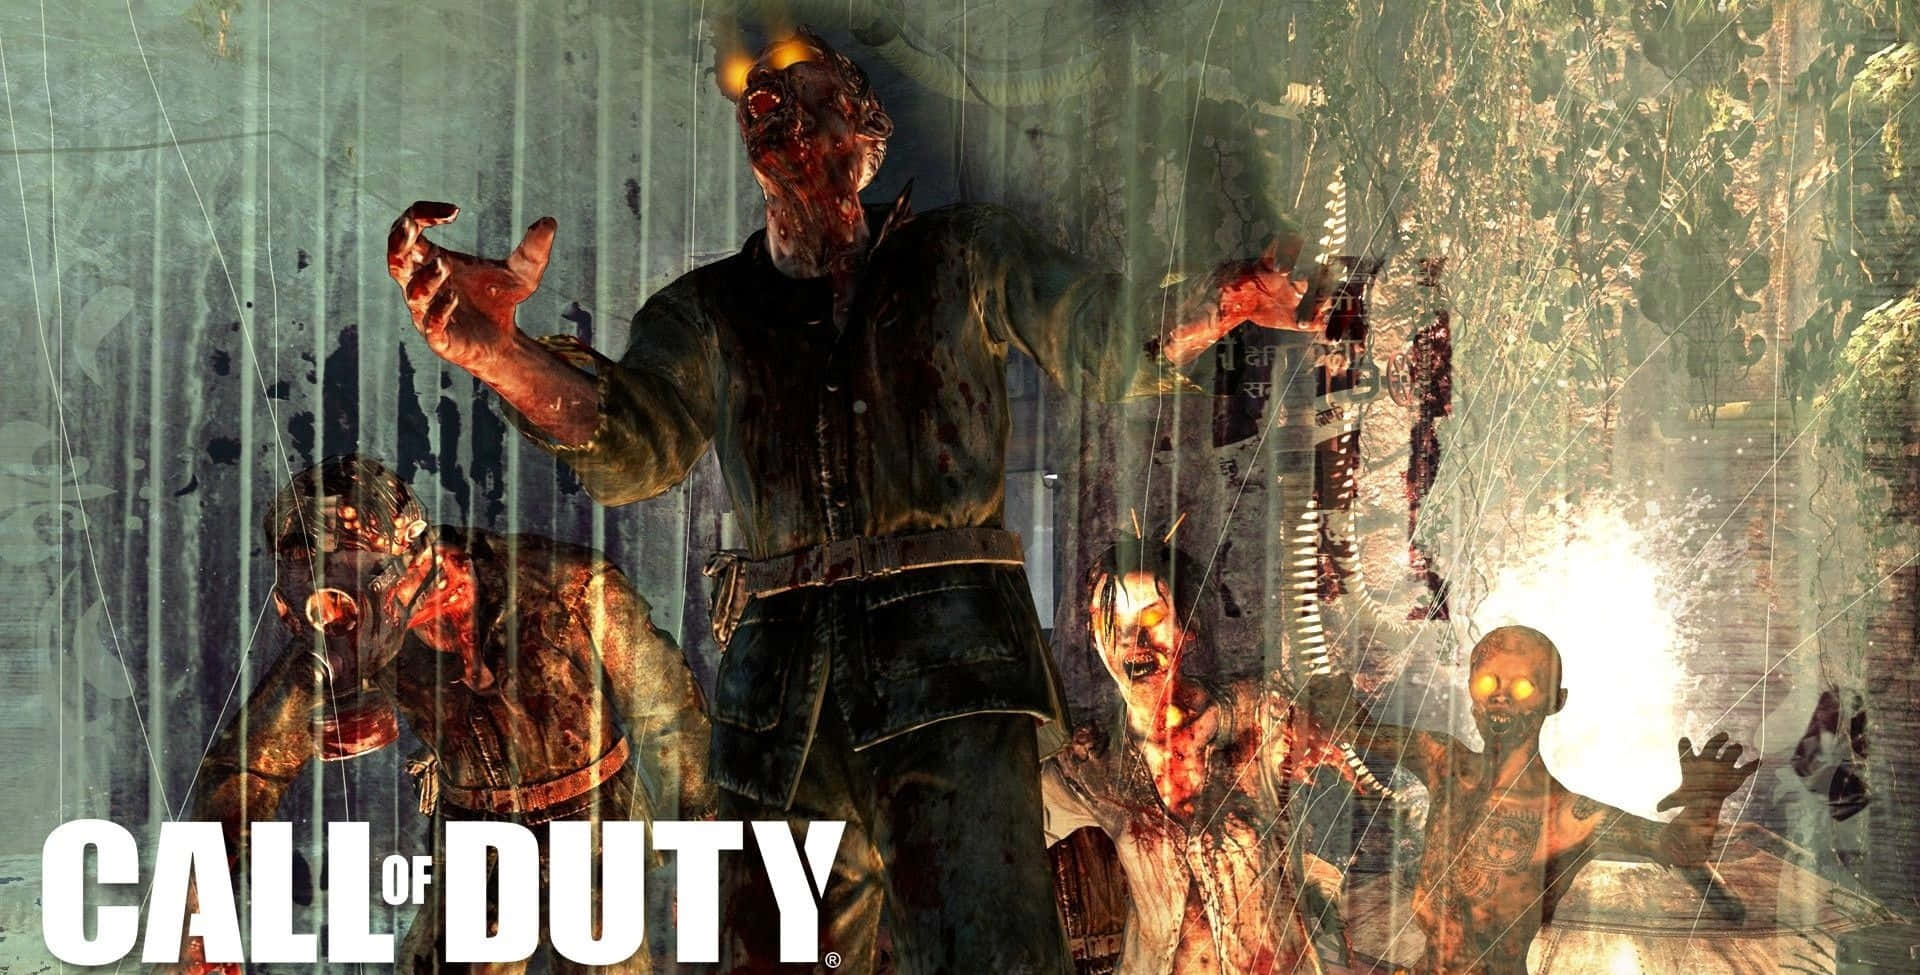 “Bringing the Undead to Life in Call of Duty: Zombies” Wallpaper